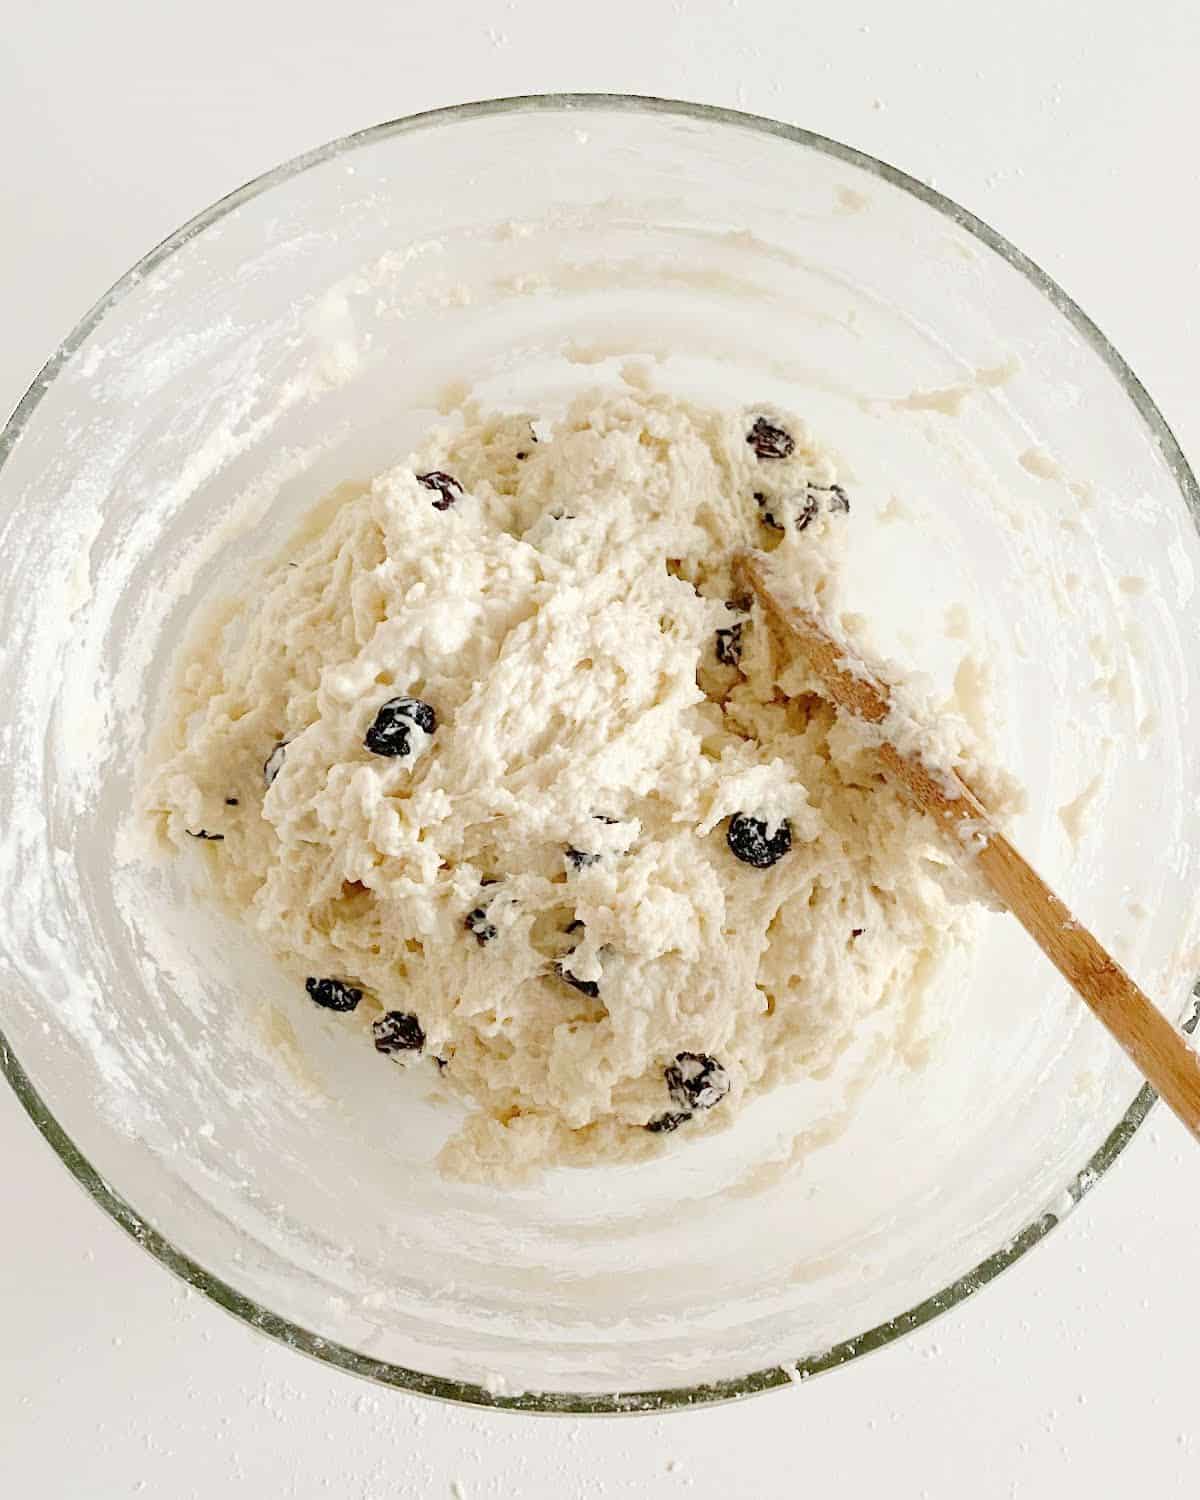 Raisin soda bread dough in a glass bowl with a wooden spoon. White surface.